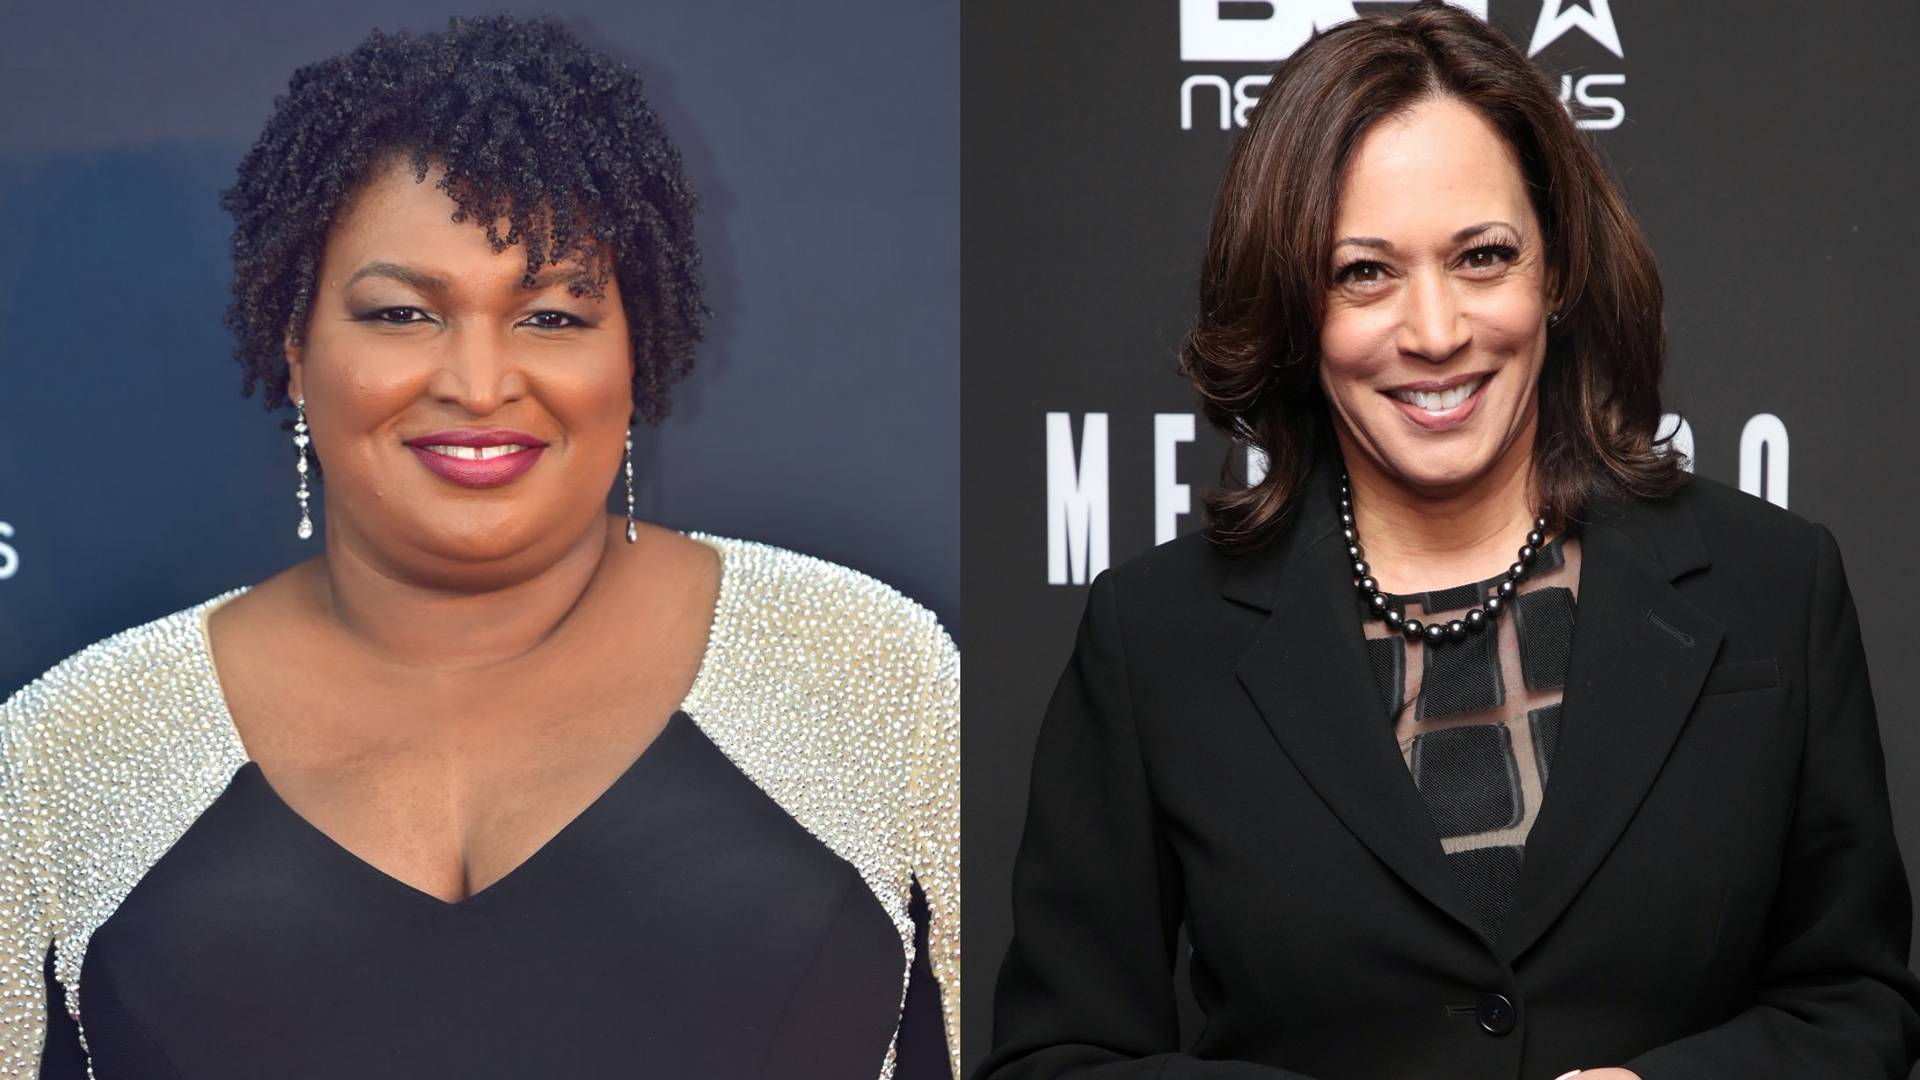 Stacey Abrams and Kamala Harris on BET Buzz 2020.